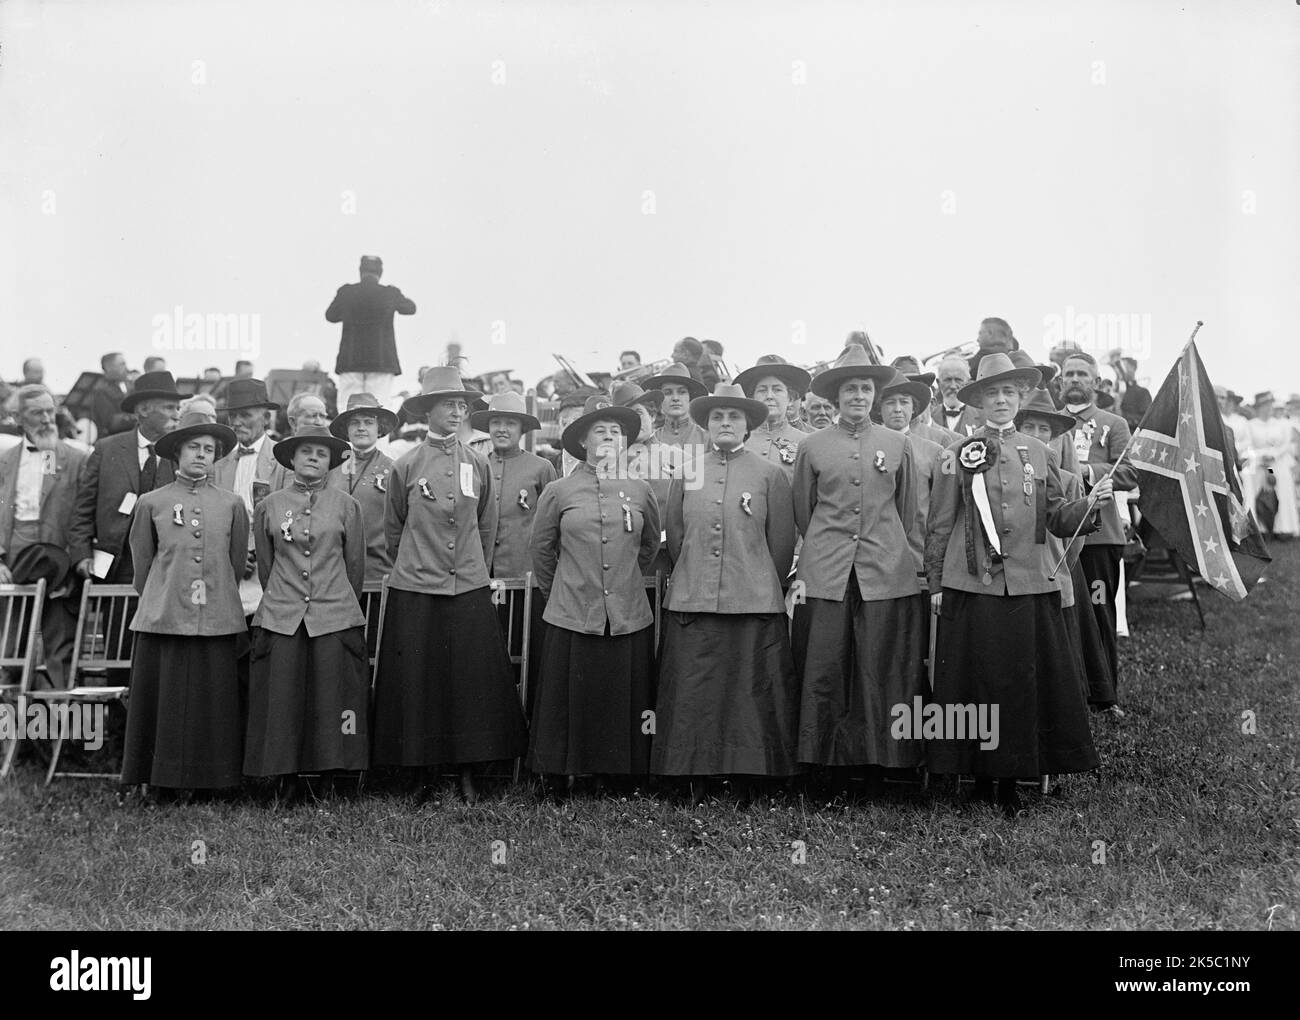 Confederate Reunion - Mrs. Hampton Osborne And Singers, 1917. Women from the southern USA with confederate flag, Washington D.C. Stock Photo